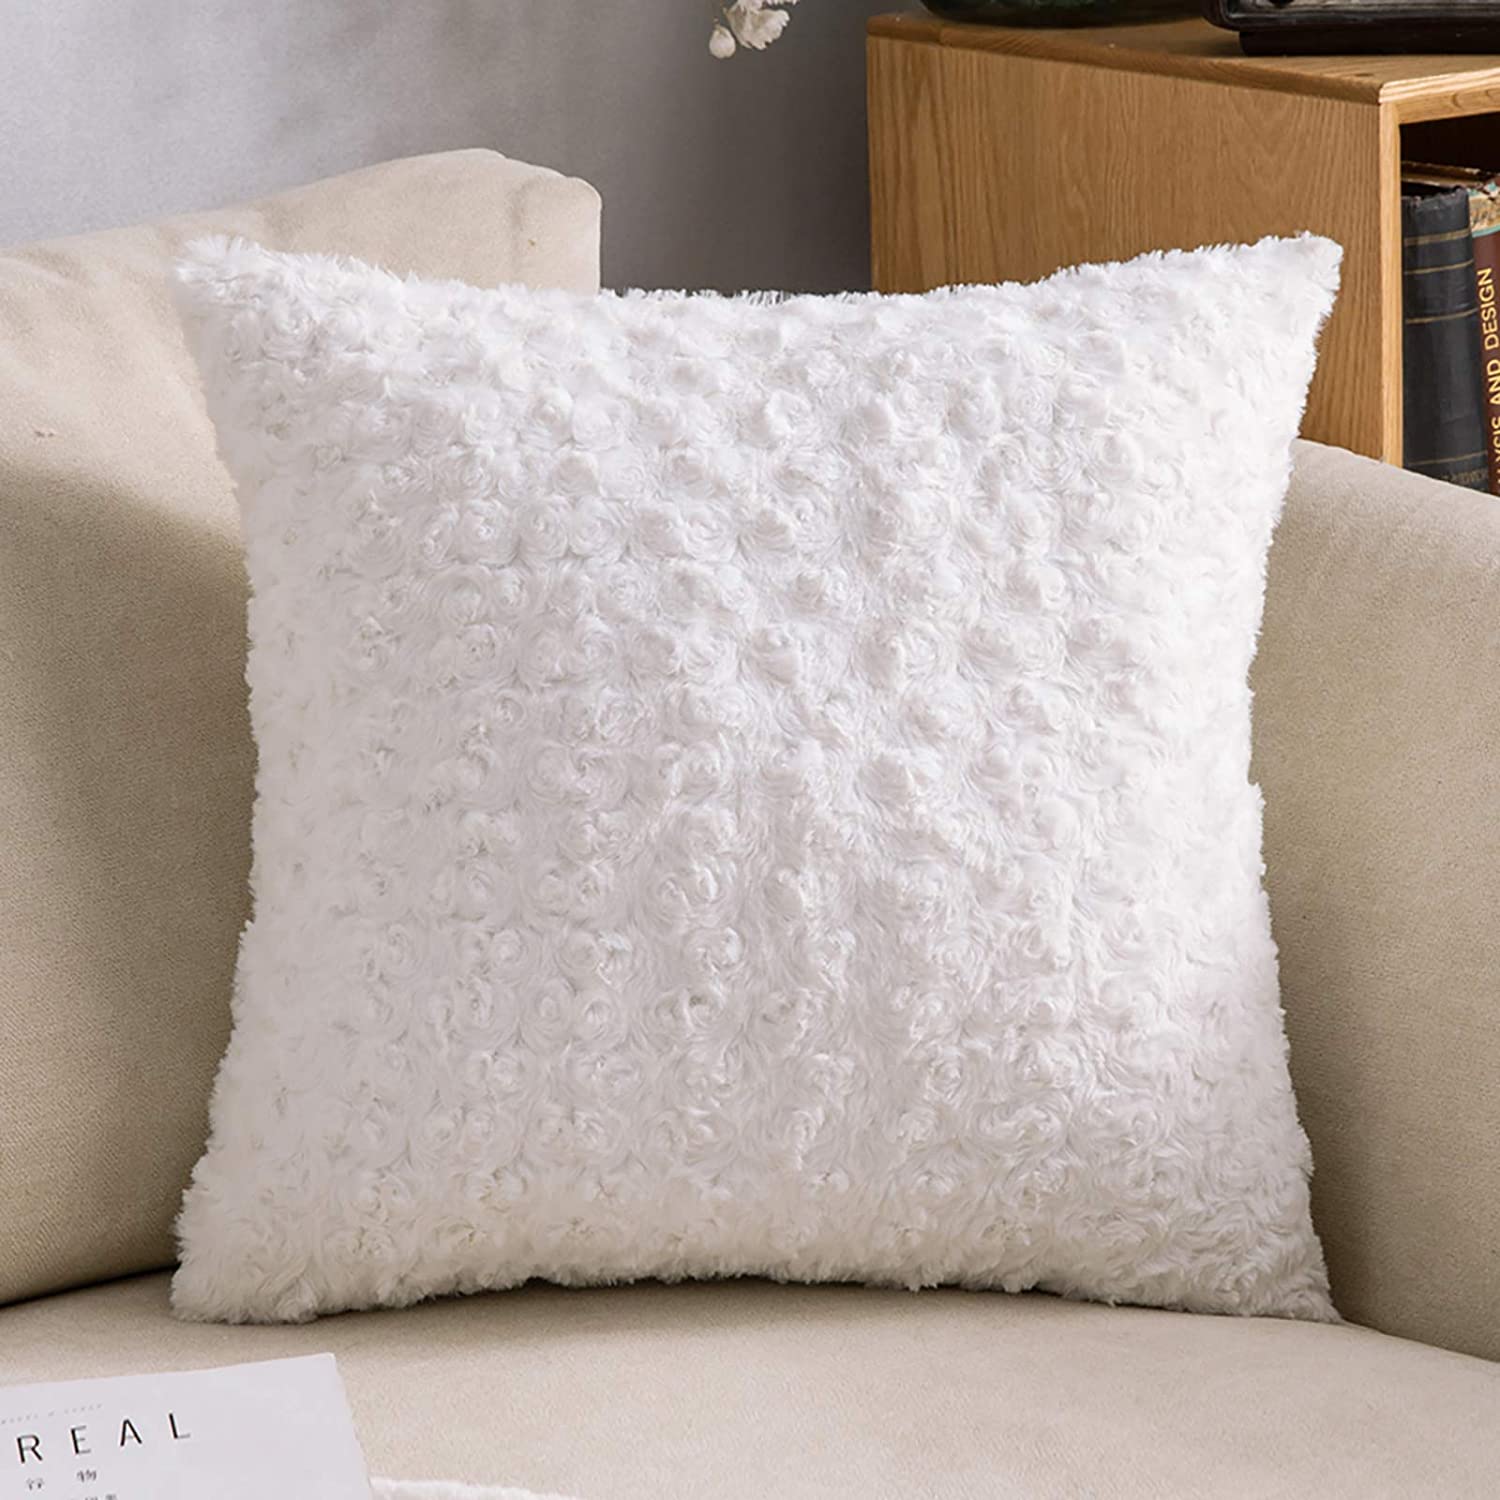 MIULEE Pack of 2 Decorative Throw Pillow Covers Luxury Faux Fuzzy Fur Super Soft